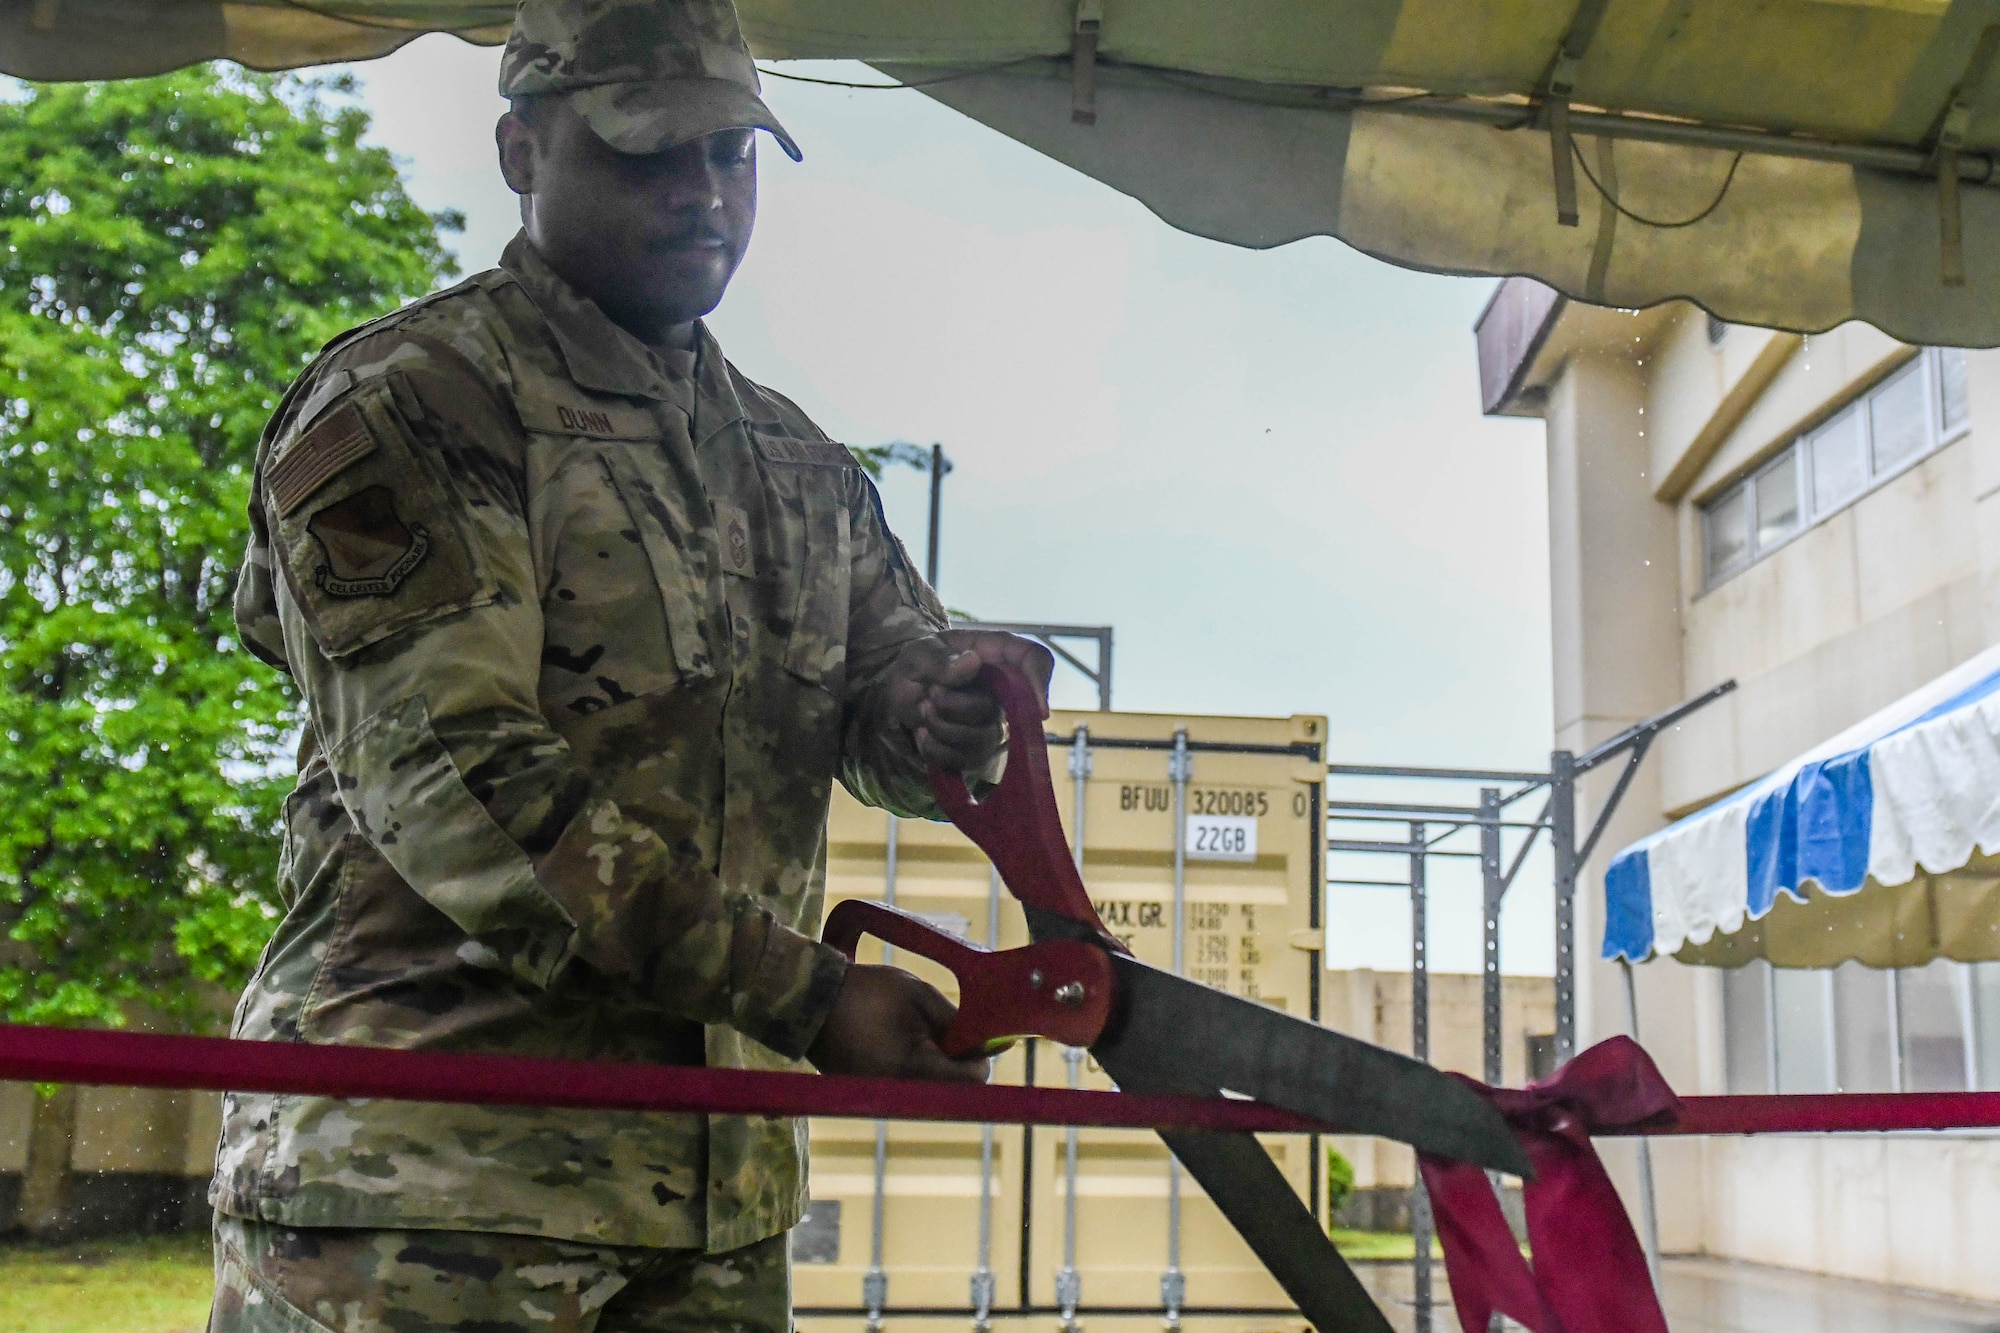 Chief Master Sgt. Jerry Dunn, 374th Airlift Wing command chief, cuts a ribbon, for a new box gym at Yokota Air Base, Japan, May 27, 2022. The U.S. Olympic & Paralympic Committee donated a high-performance box gym to Yokota Air Base during the 2020 Olympic games. (U.S. Air Force photo by Staff Sgt. Jessica Avallone)